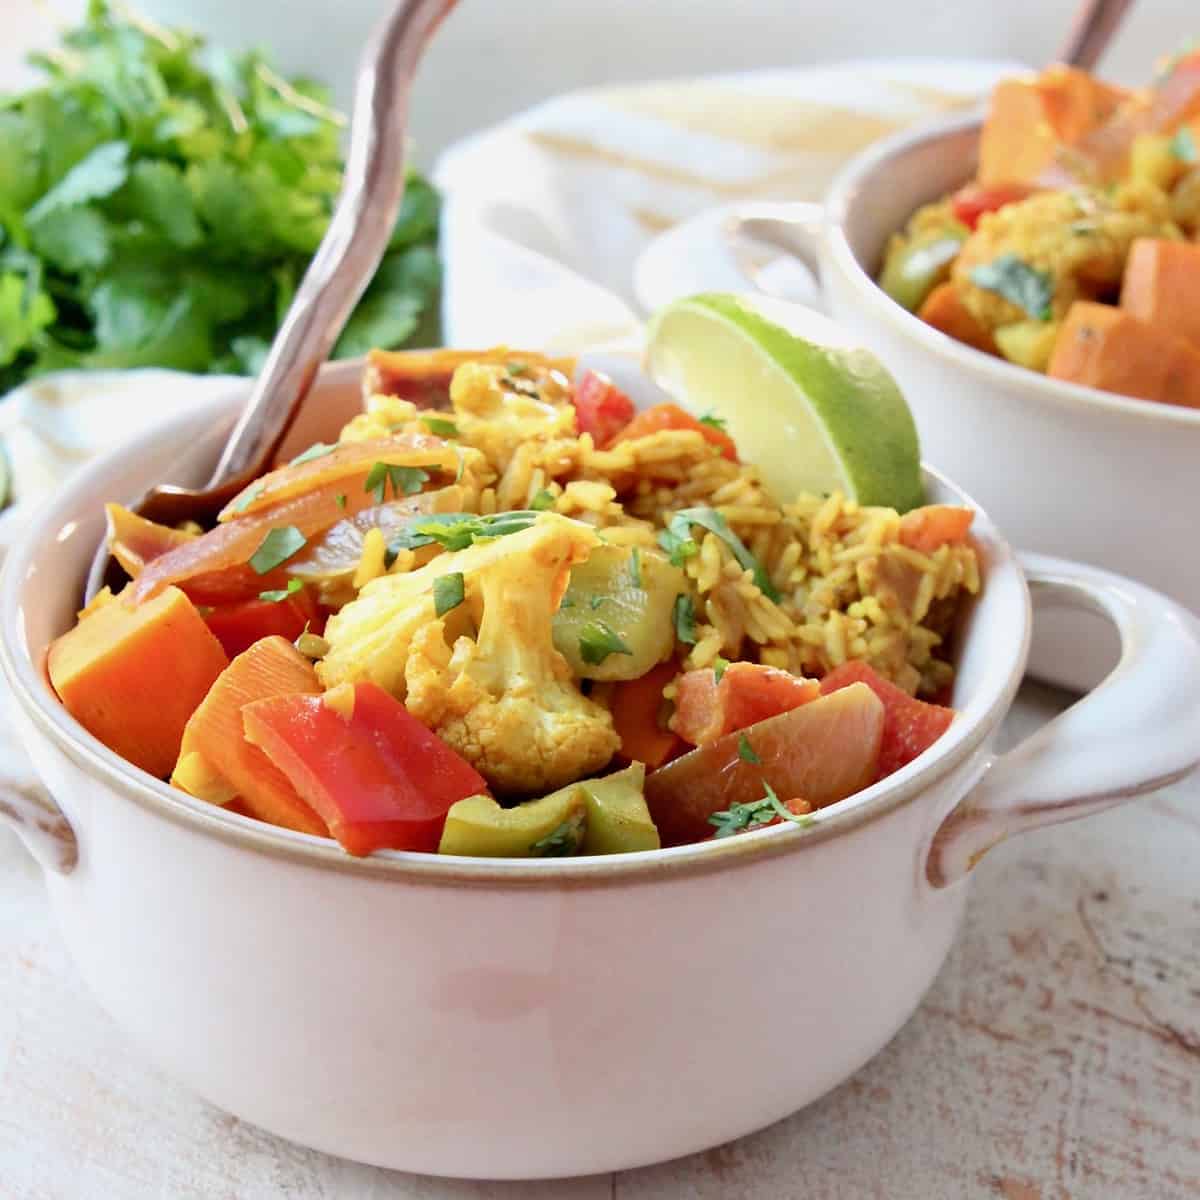 Easy Vegetable Curry Casserole Recipe - WhitneyBond.com